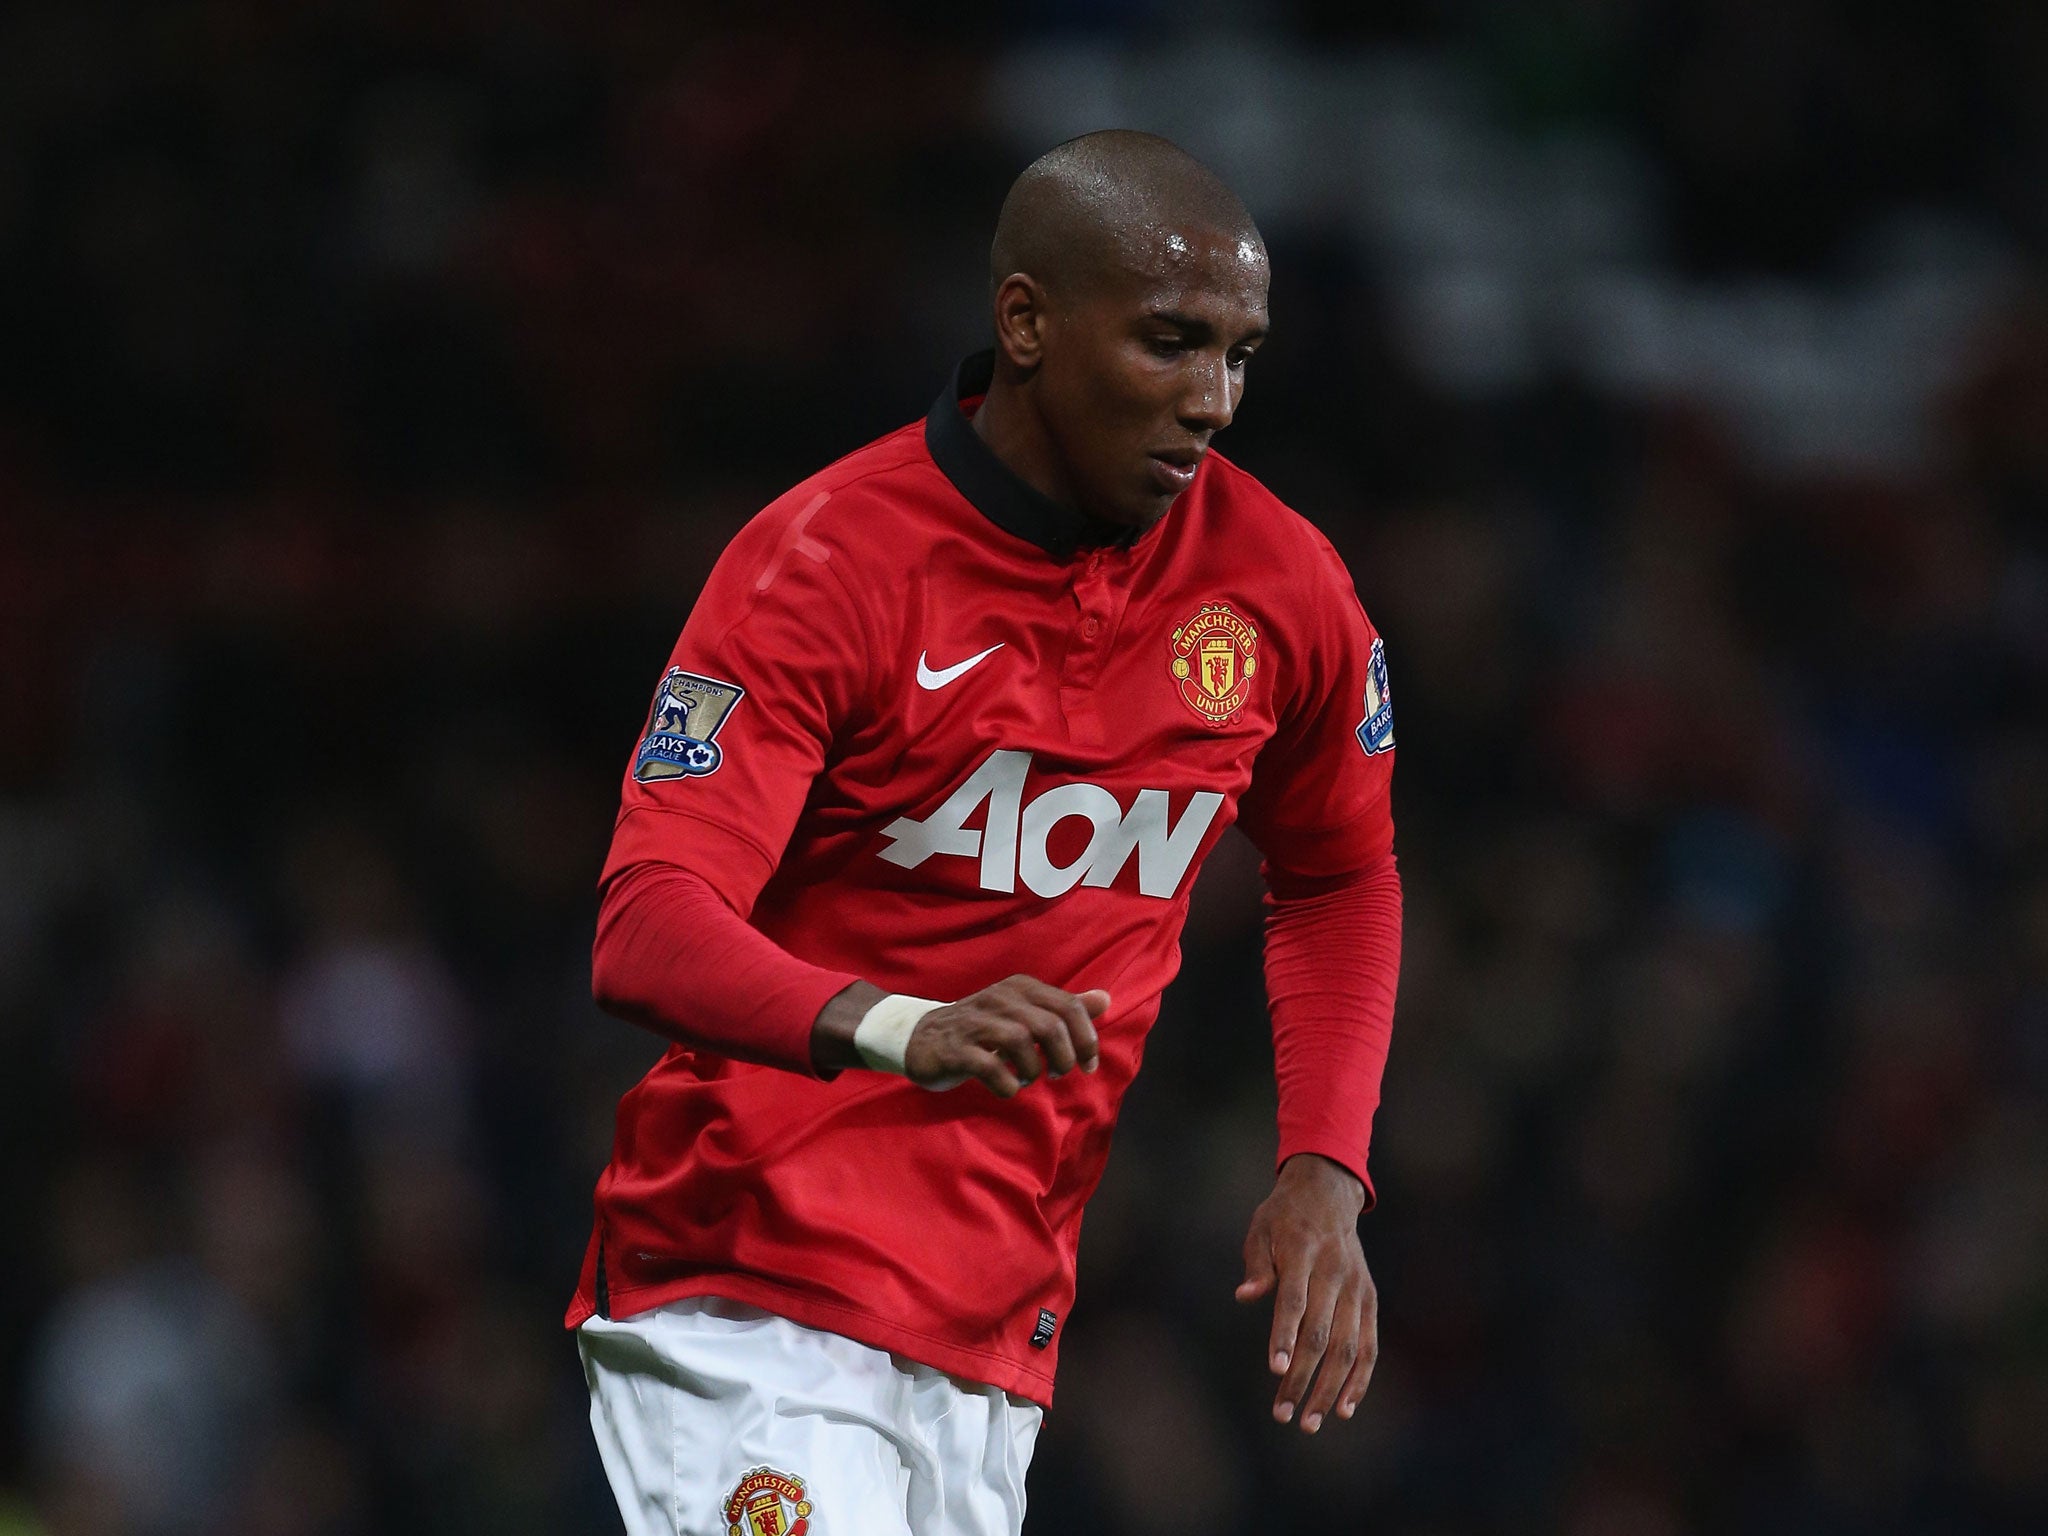 Manchester United winger Ashley Young has been told to cut out his diving by former Liverpool midfielder Dietmar Hamann